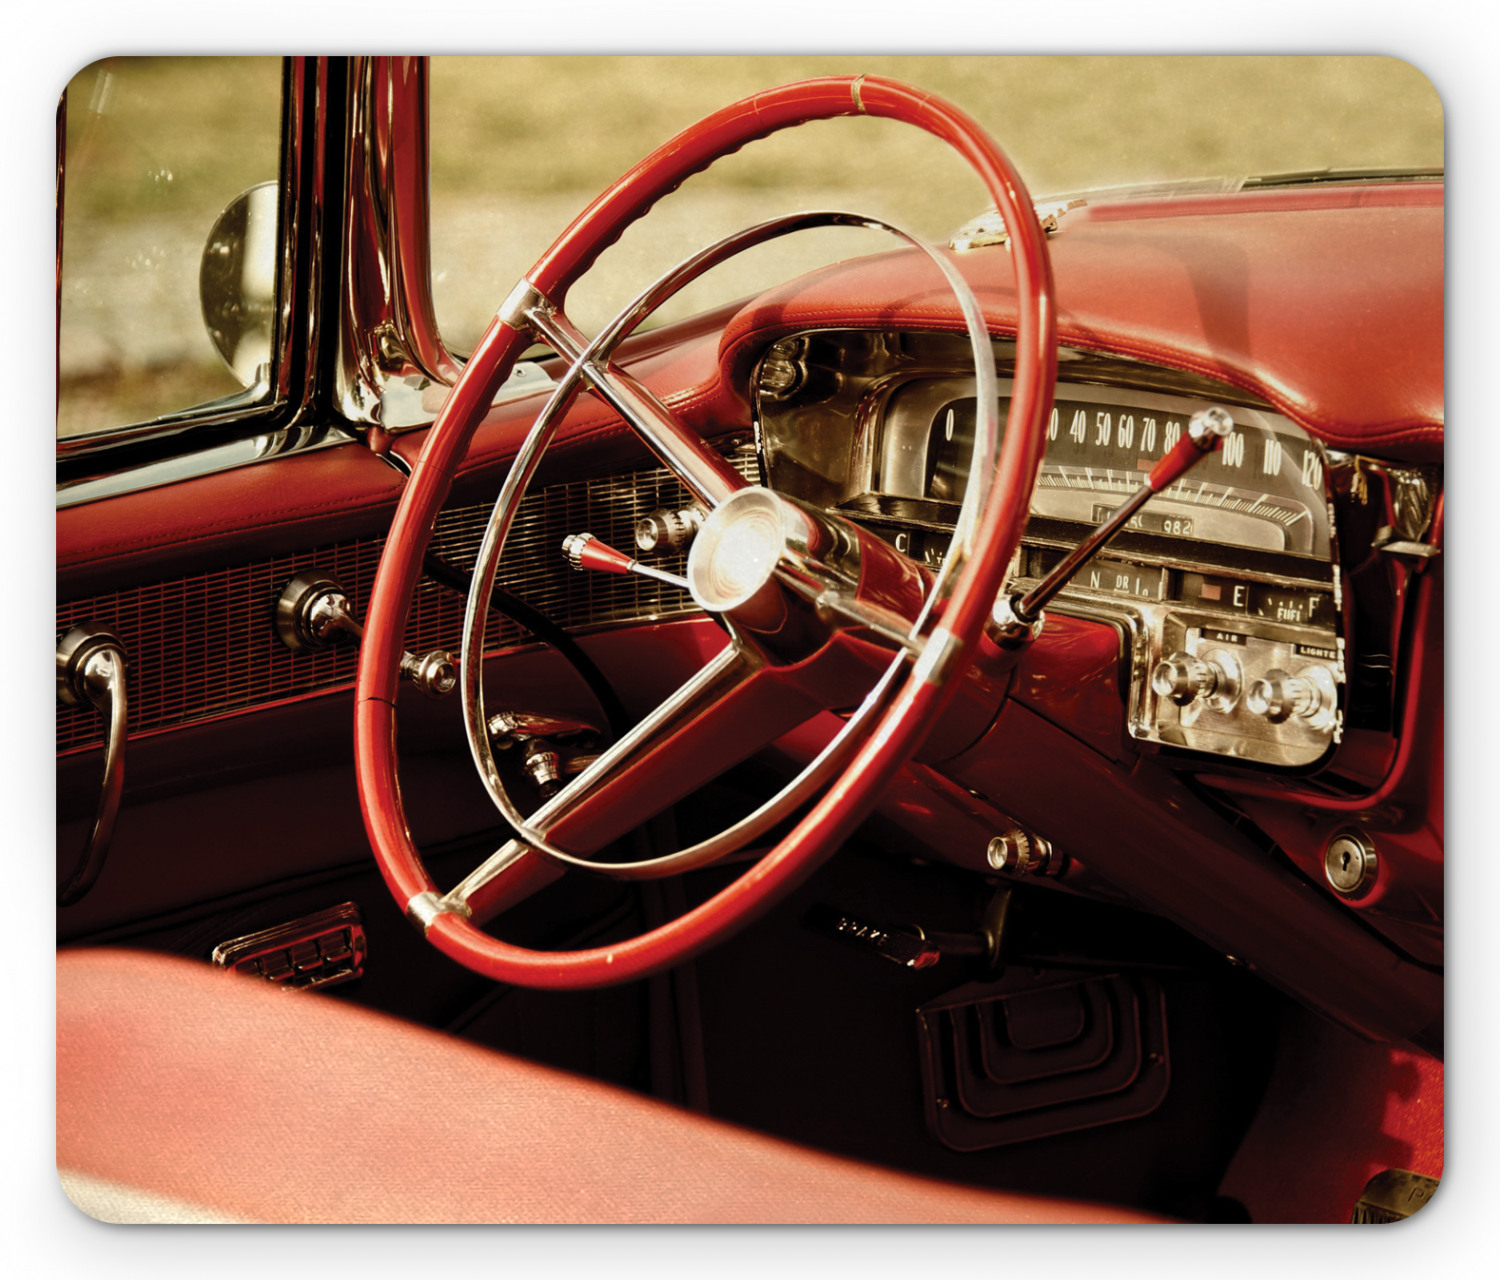 Cars Mouse Pad, Interior of an Antique Classic Aged Car Exquisite Control Board Details Retro Picture, Rectangle Non-Slip Rubber Mousepad, Red Grey, by Ambesonne - image 1 of 2